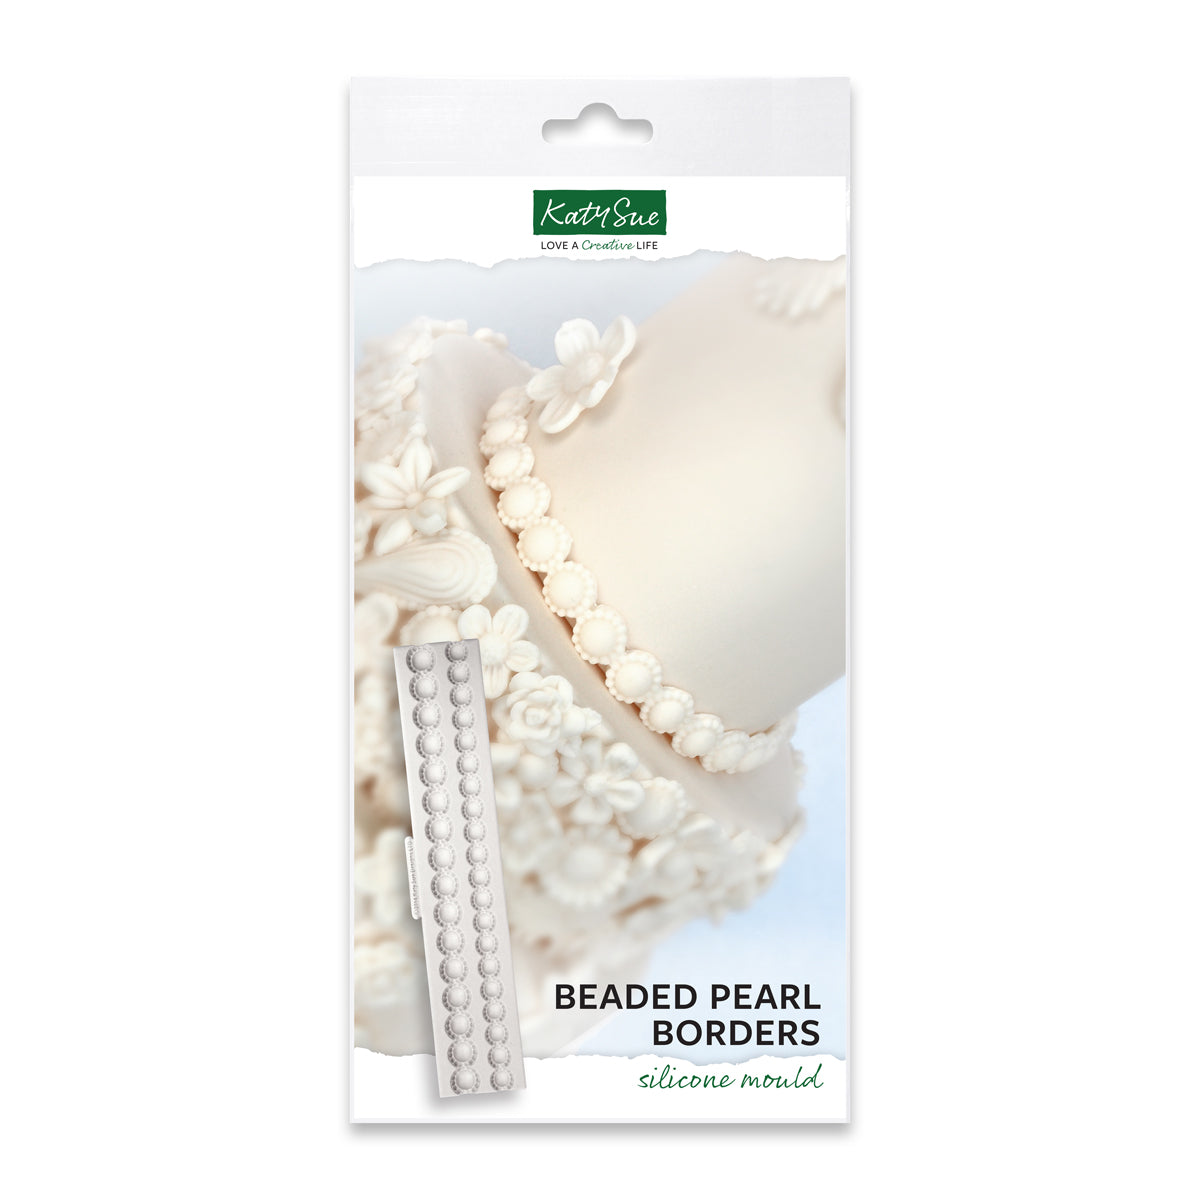 Beaded Pearl Borders Silicone Mould